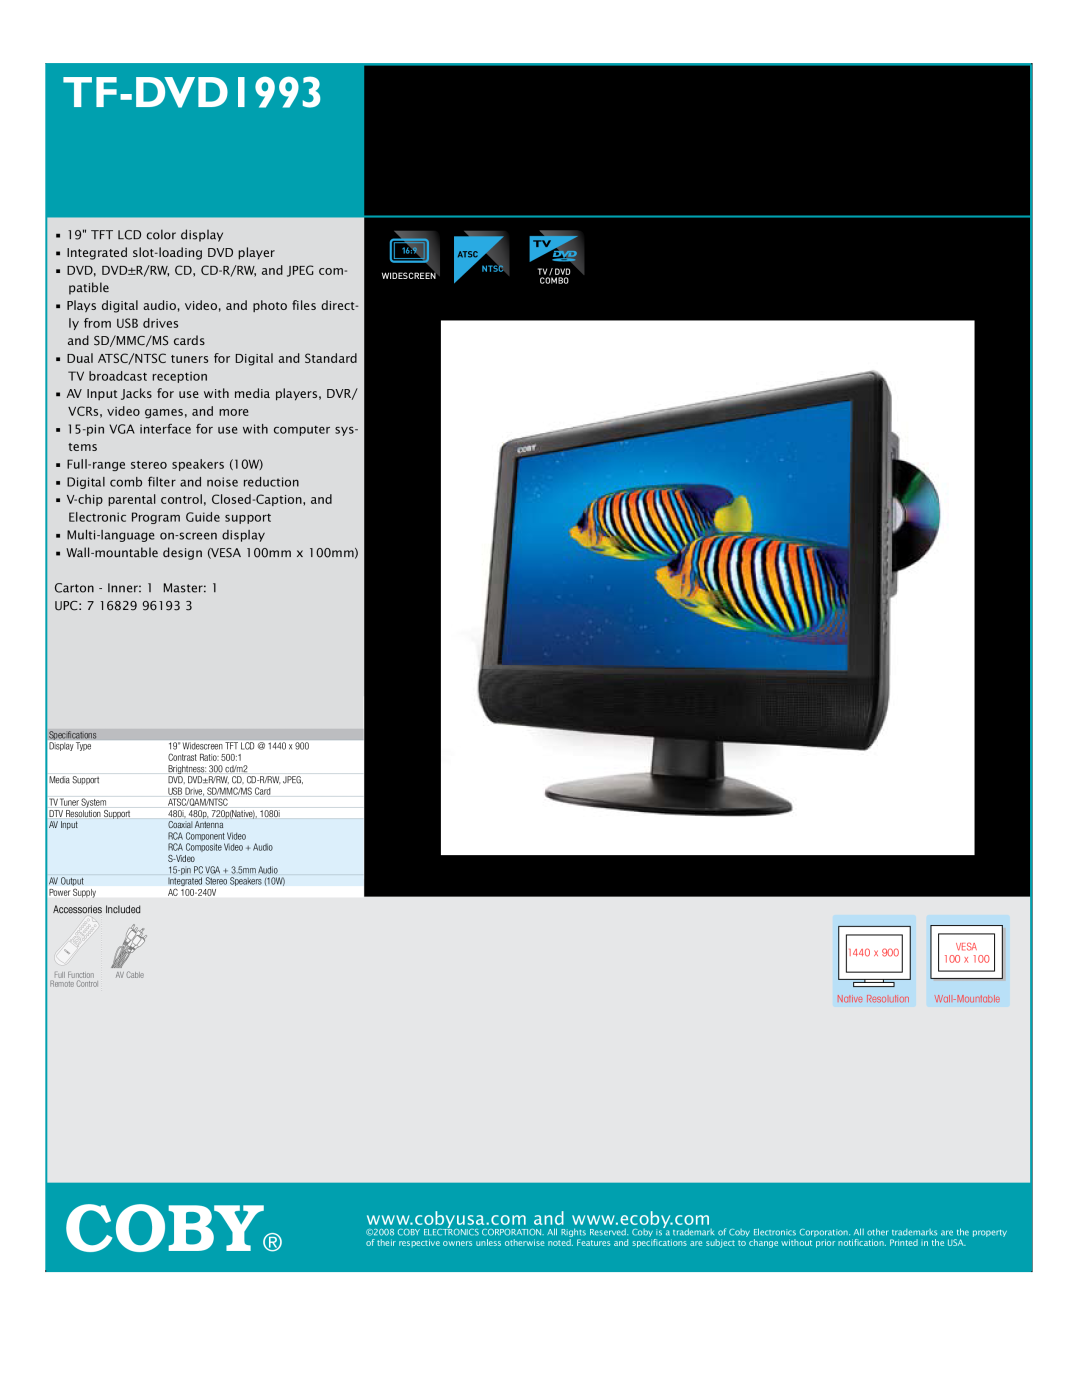 COBY electronic TF-DVD1993 specifications Coby, with SLOT-LOADING DVD PLAYER, 19WIDESCREEN LCD HDTV/MONITOR 